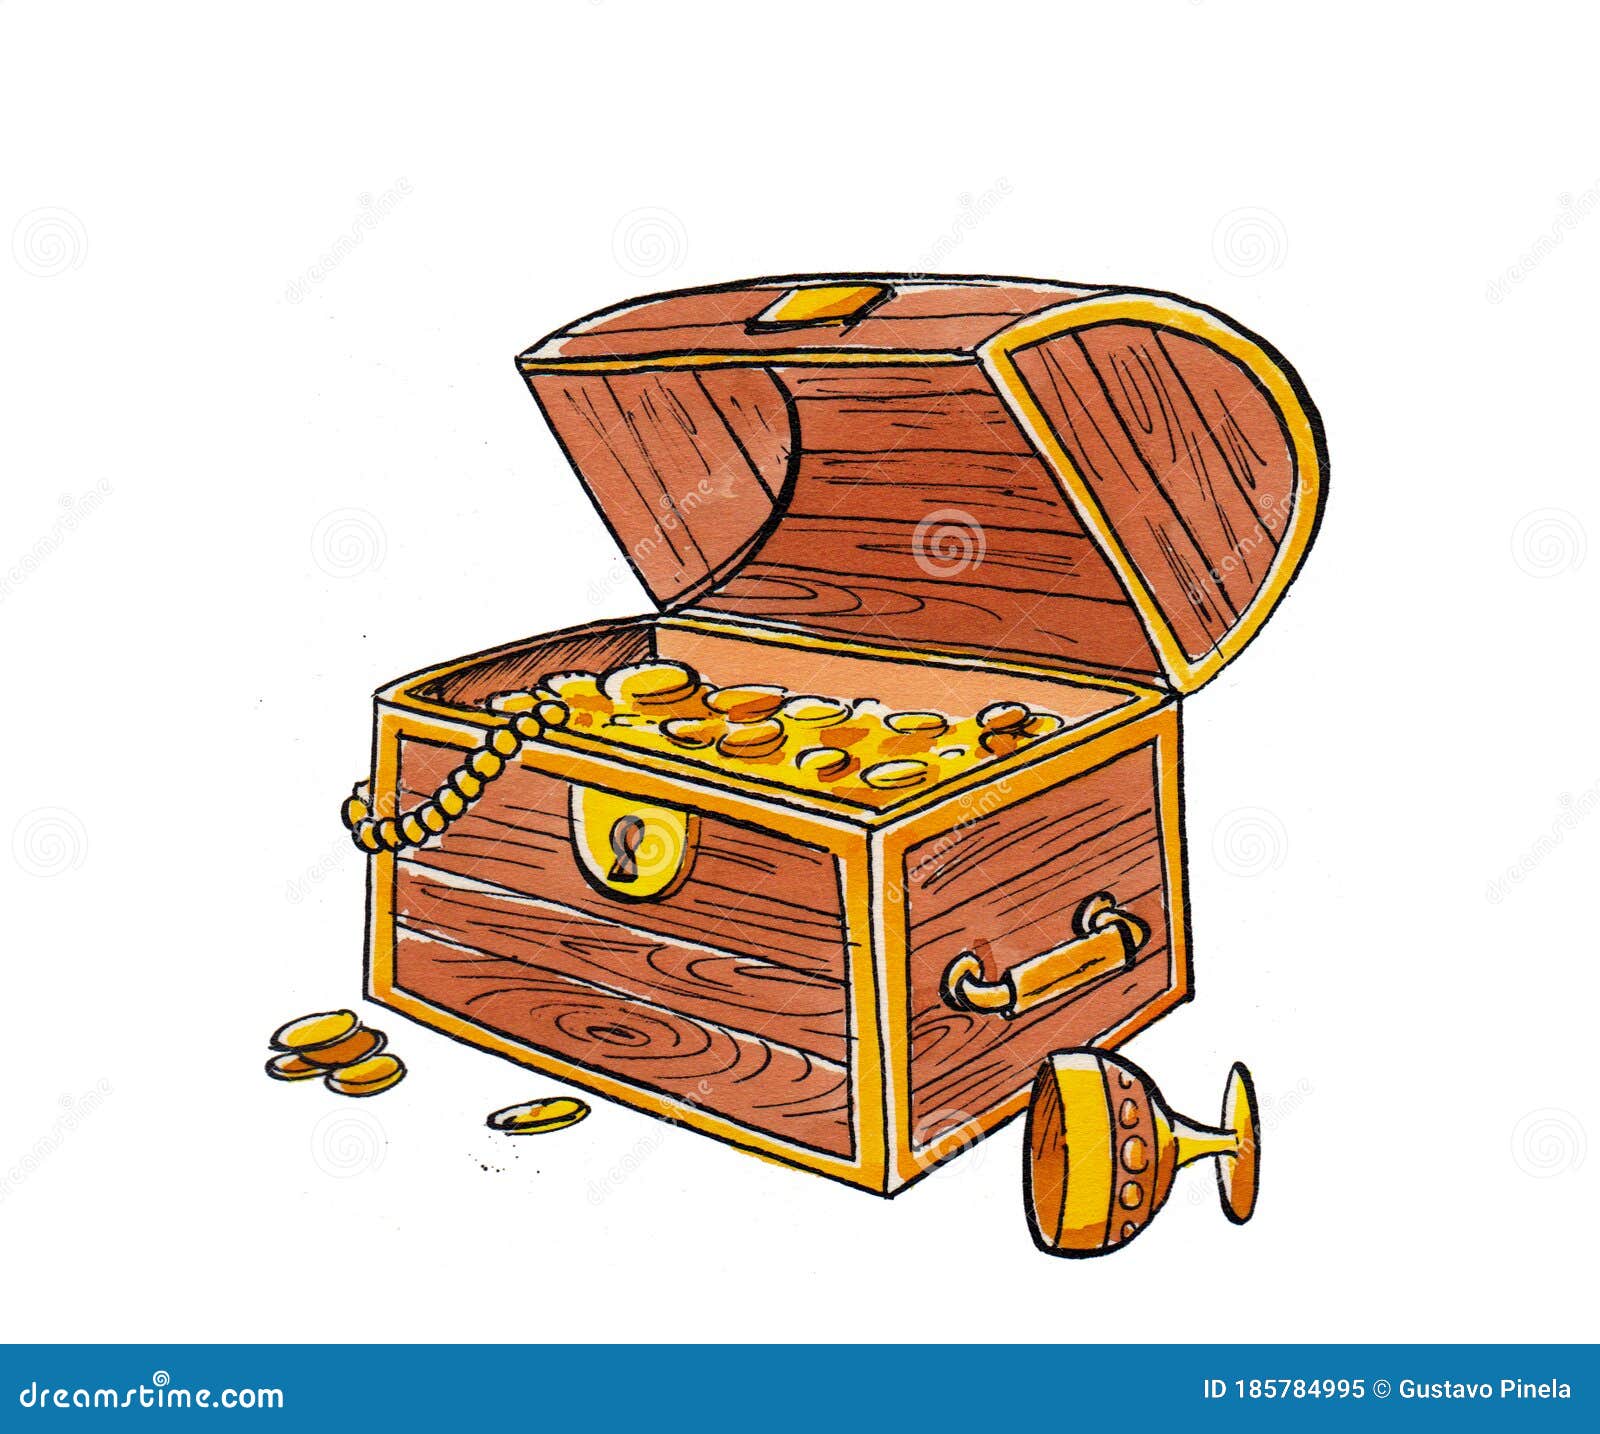 treasure chest, with gold items